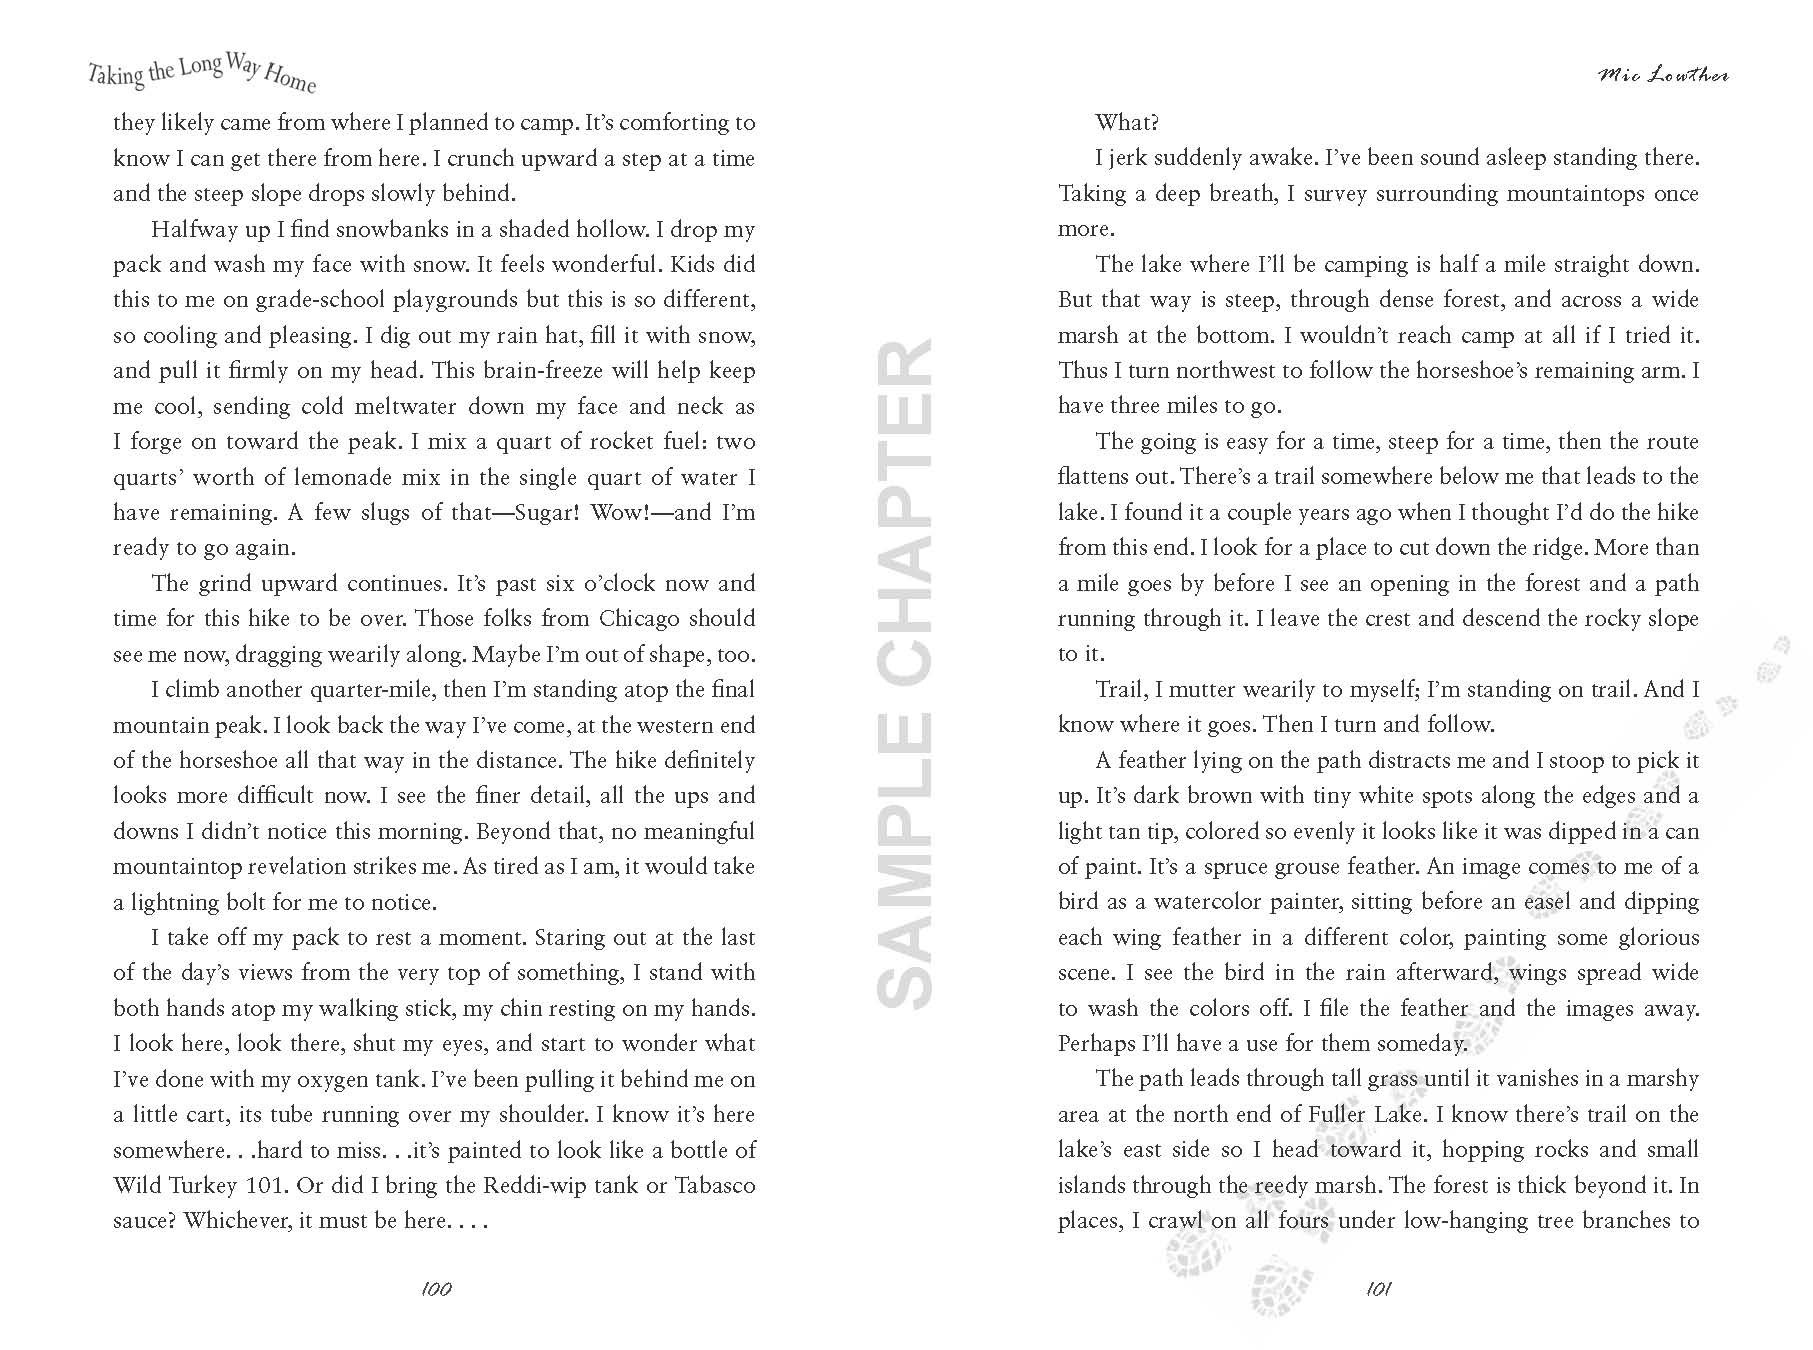 Taking The Long Way Home sample chapter pg 11 & 12